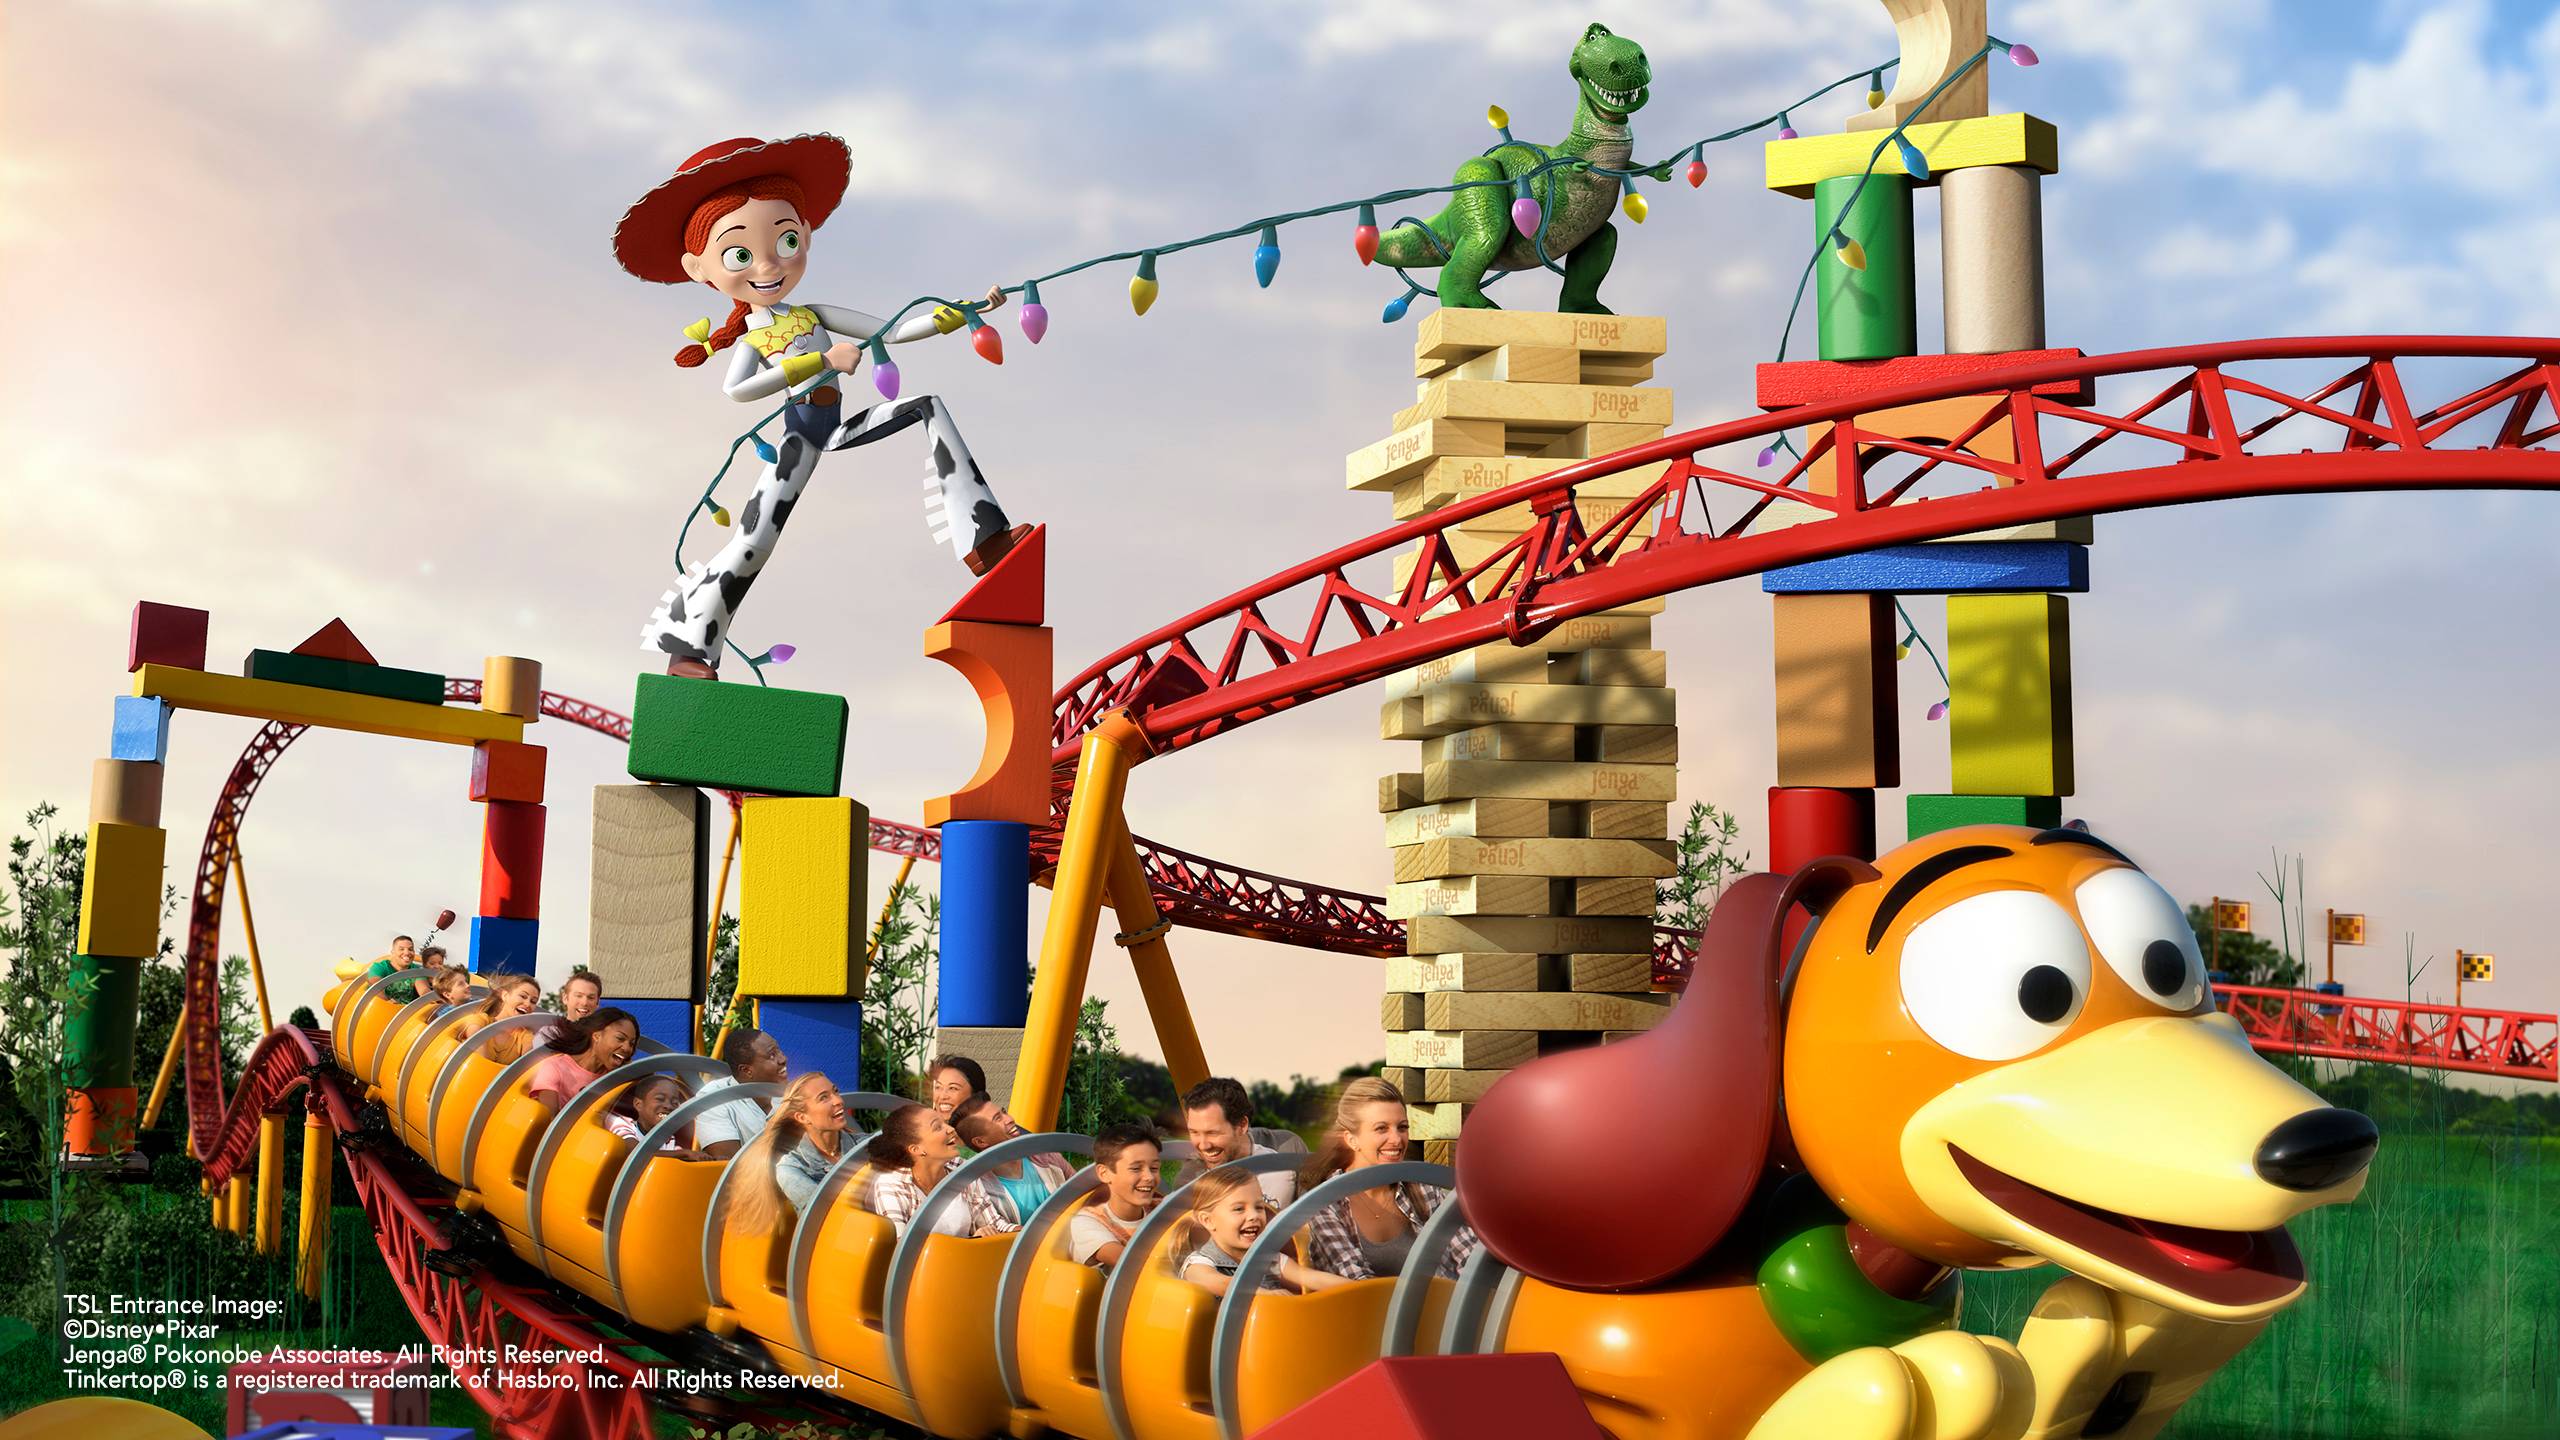 Toy Story Land's Slinky Dog Dash wagging tails temporarily removed